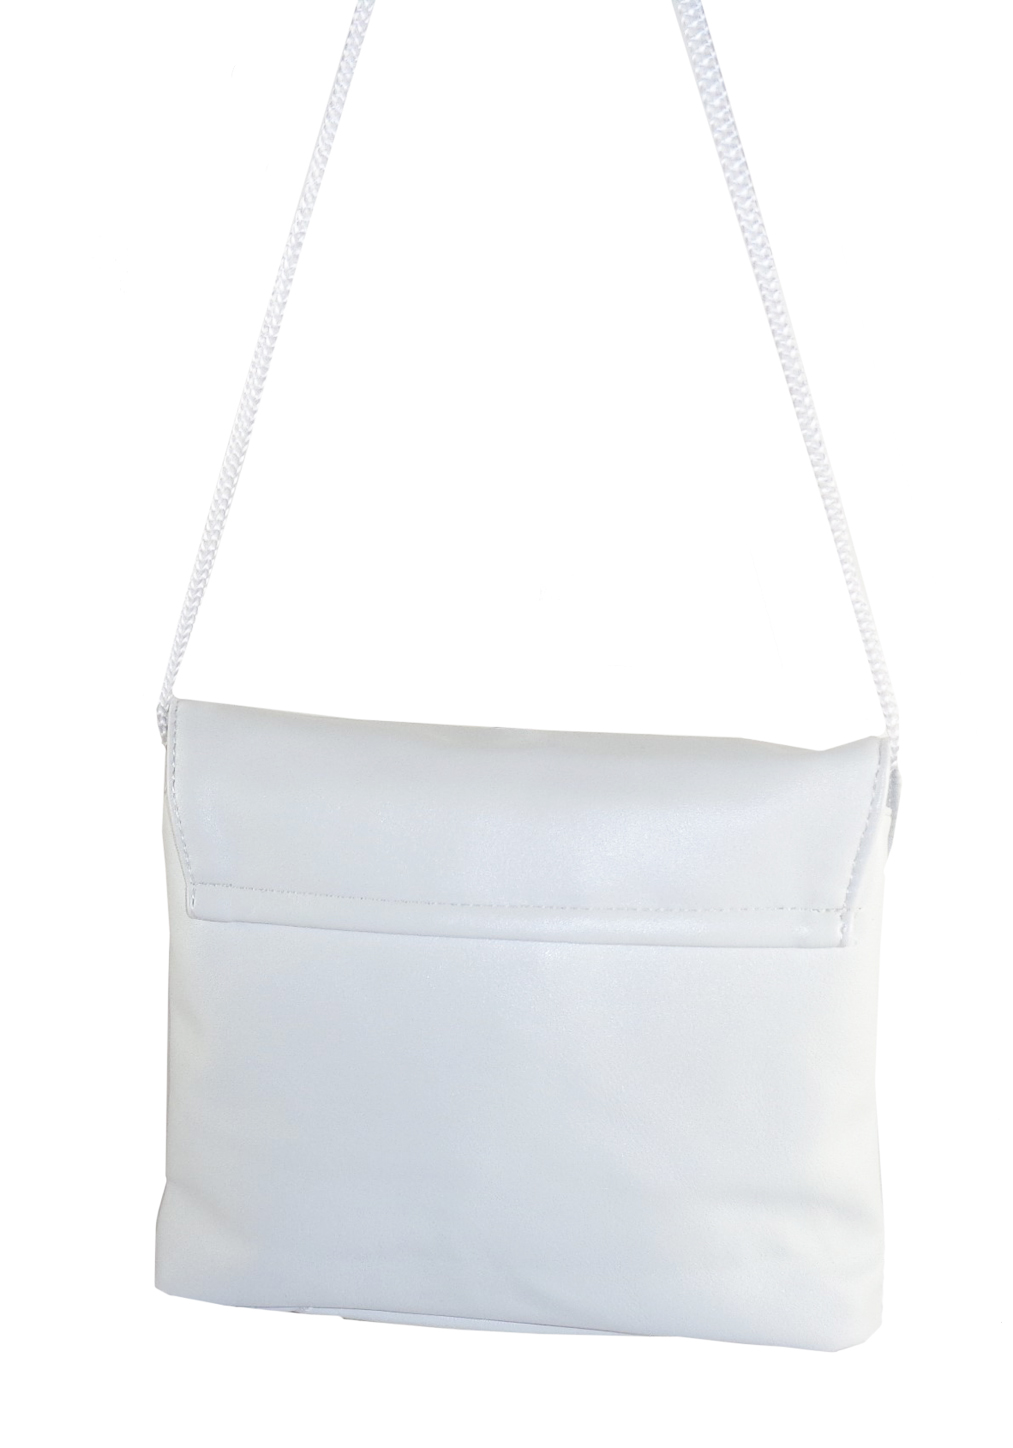 Childrens white handbag with butterfly tirms-6535